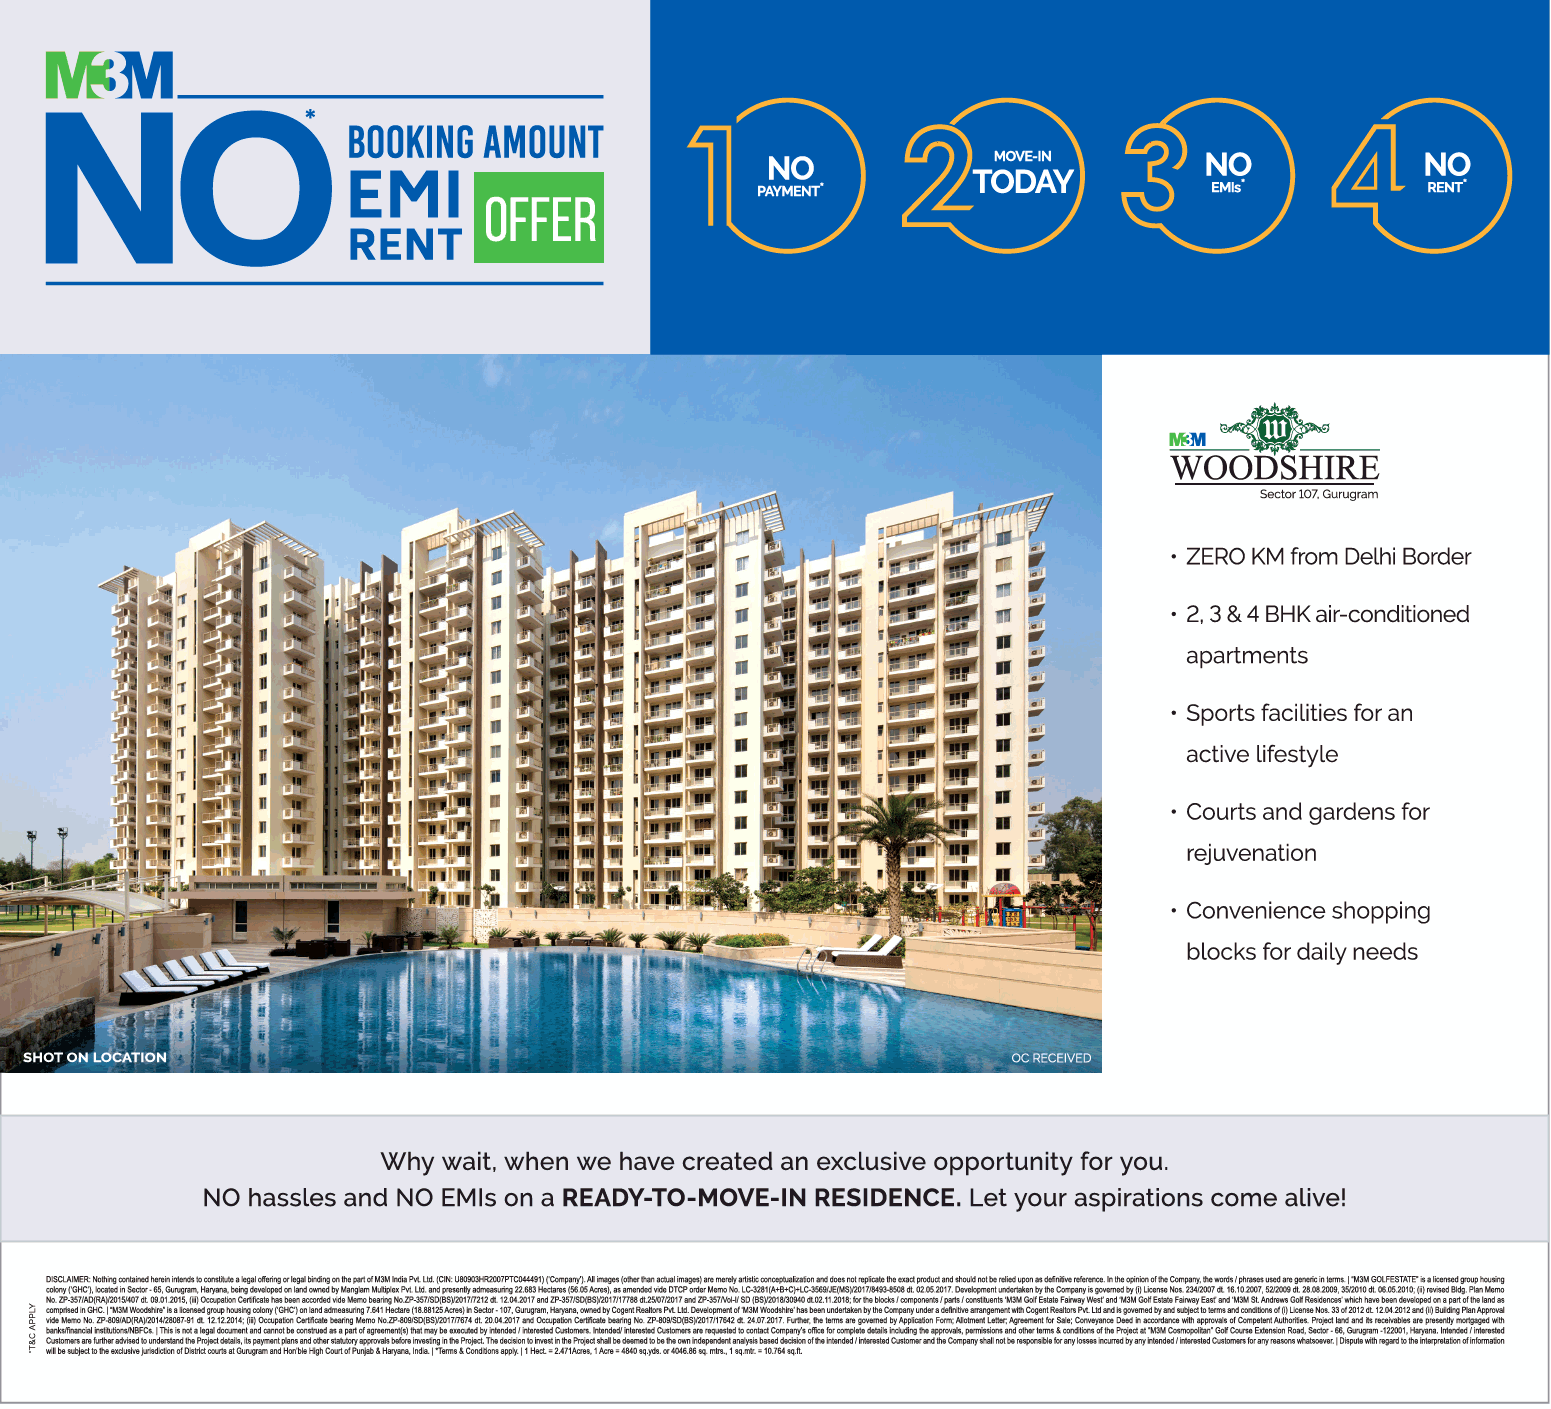 No hassles and no EMIs on a ready-to-move-in residence at M3M Woodshire in Sector 107, Gurgaon Update